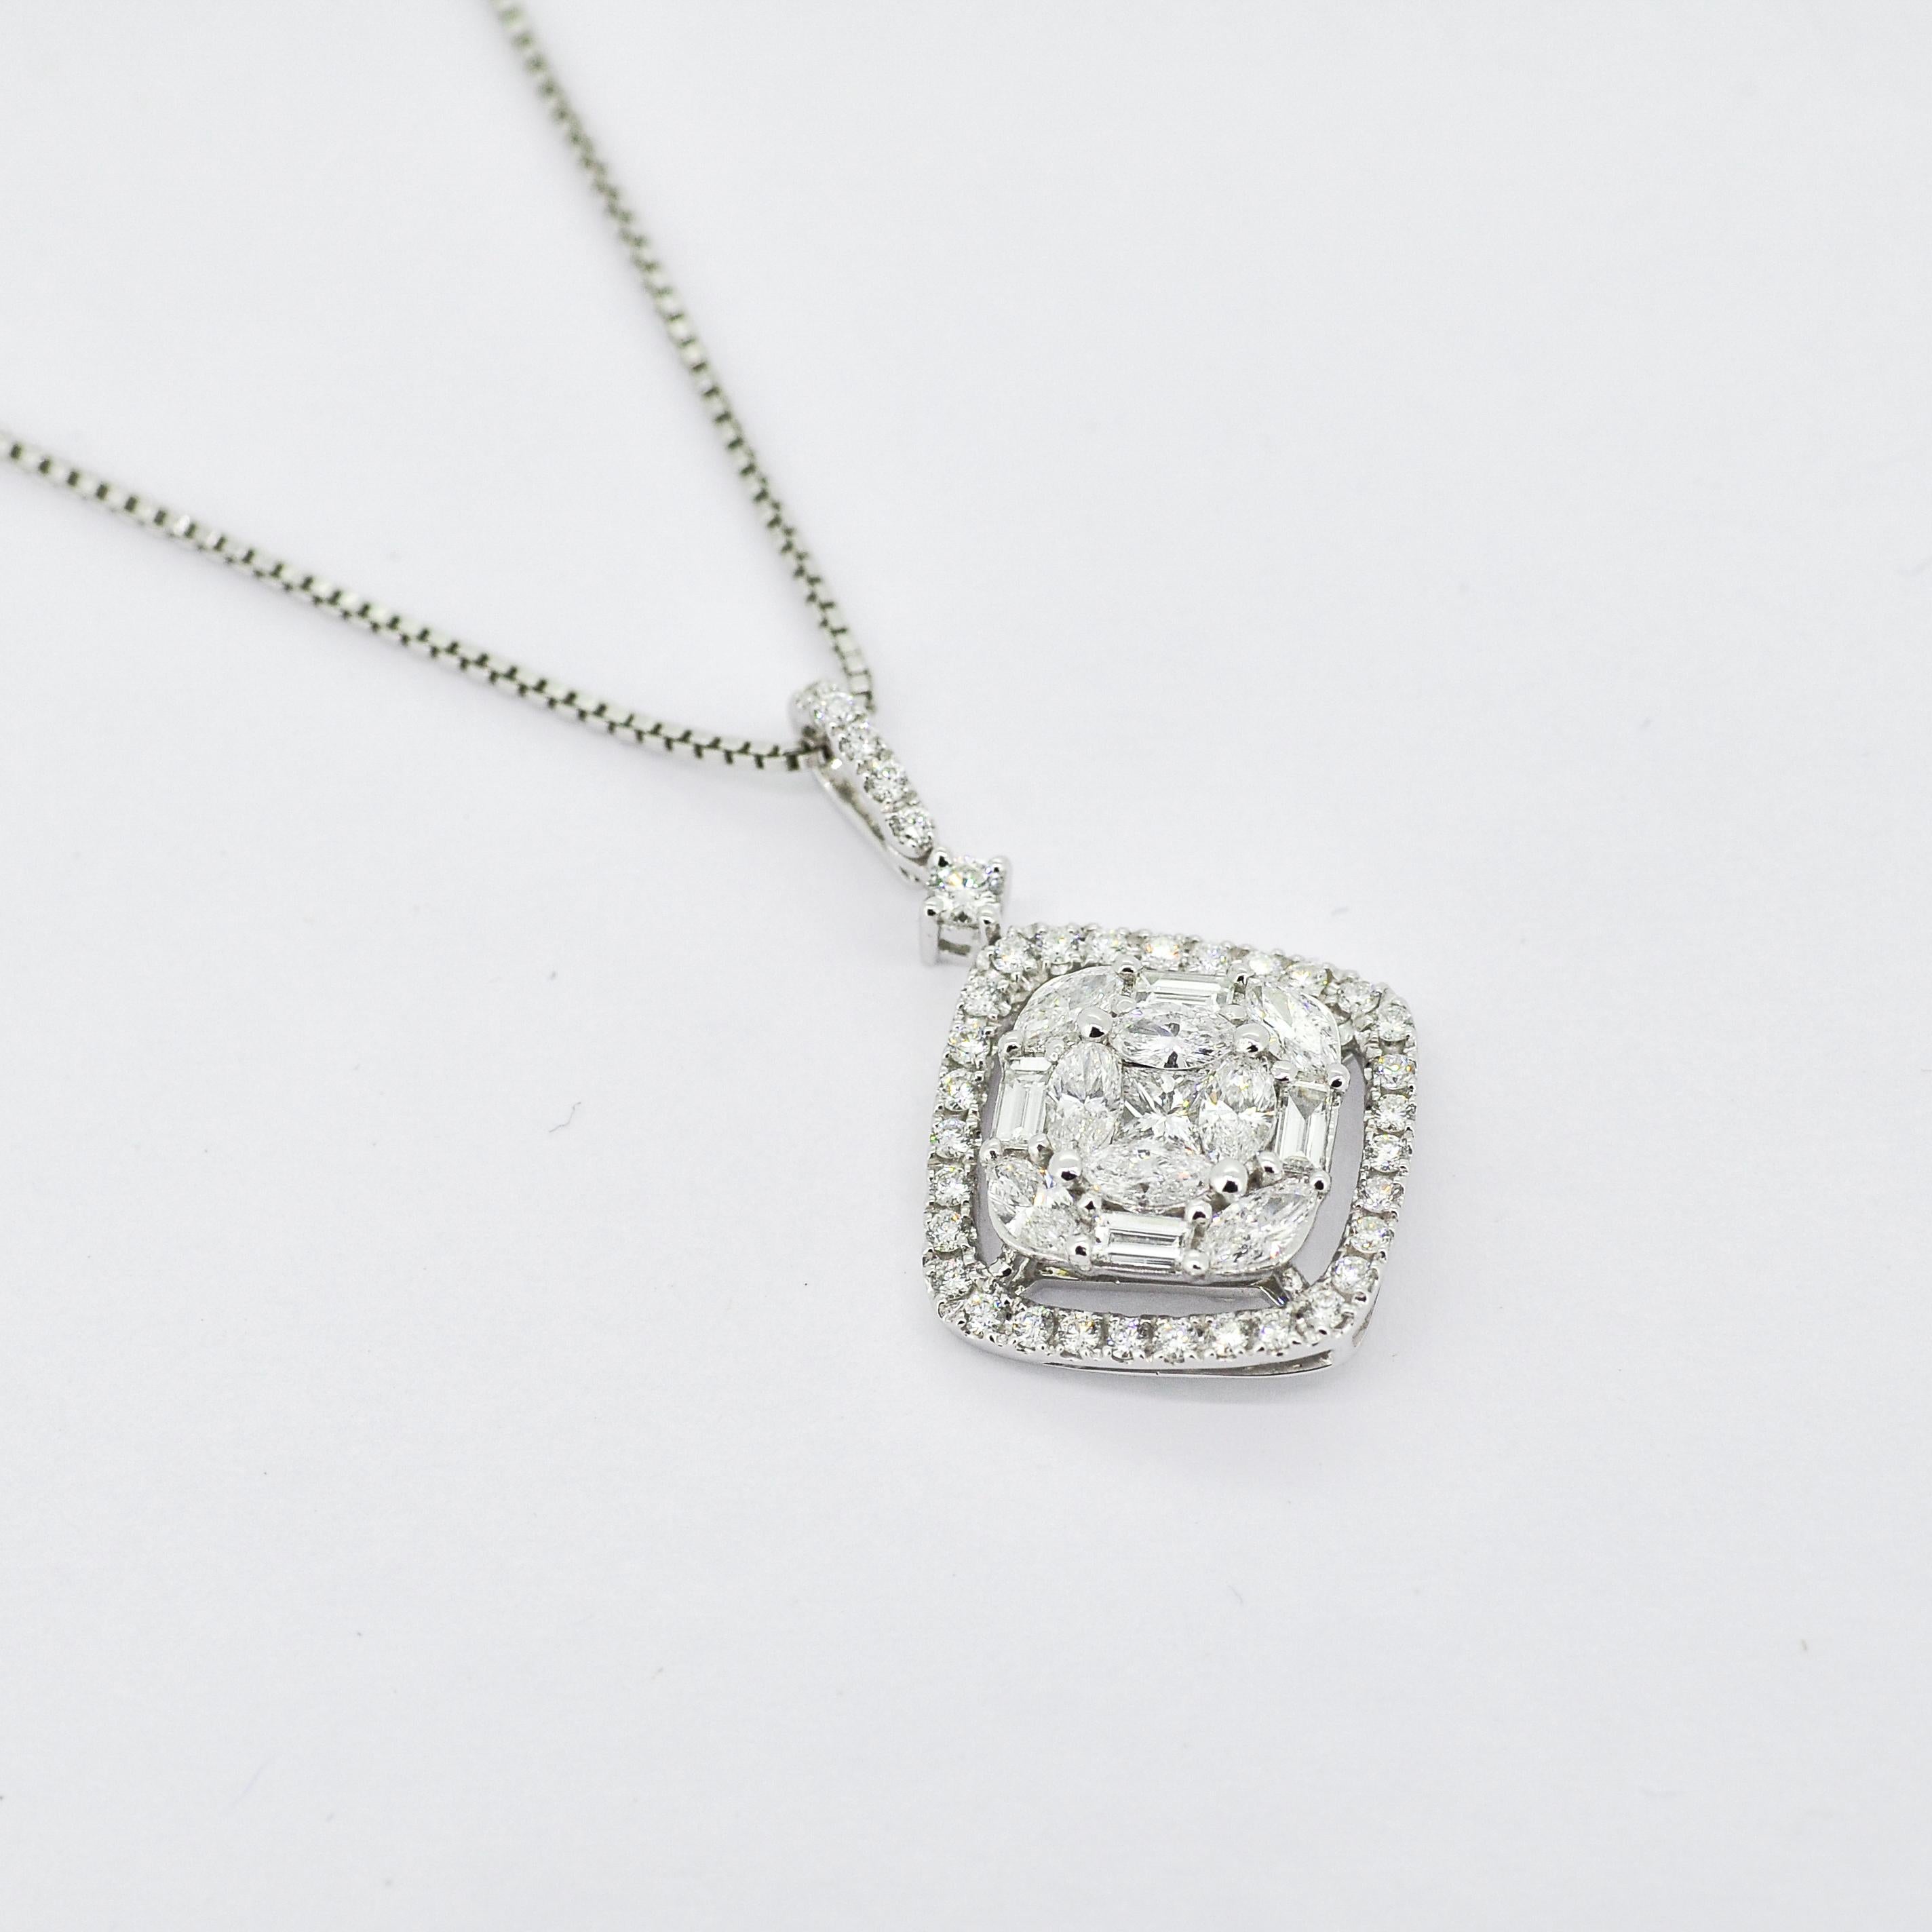 This stunning pendant necklace features a beautiful center princess diamond that takes center stage, set within an elaborate intricate design with Marquise diamonds and baguettes in a square halo of diamond pavé. This geometrically gorgeous design